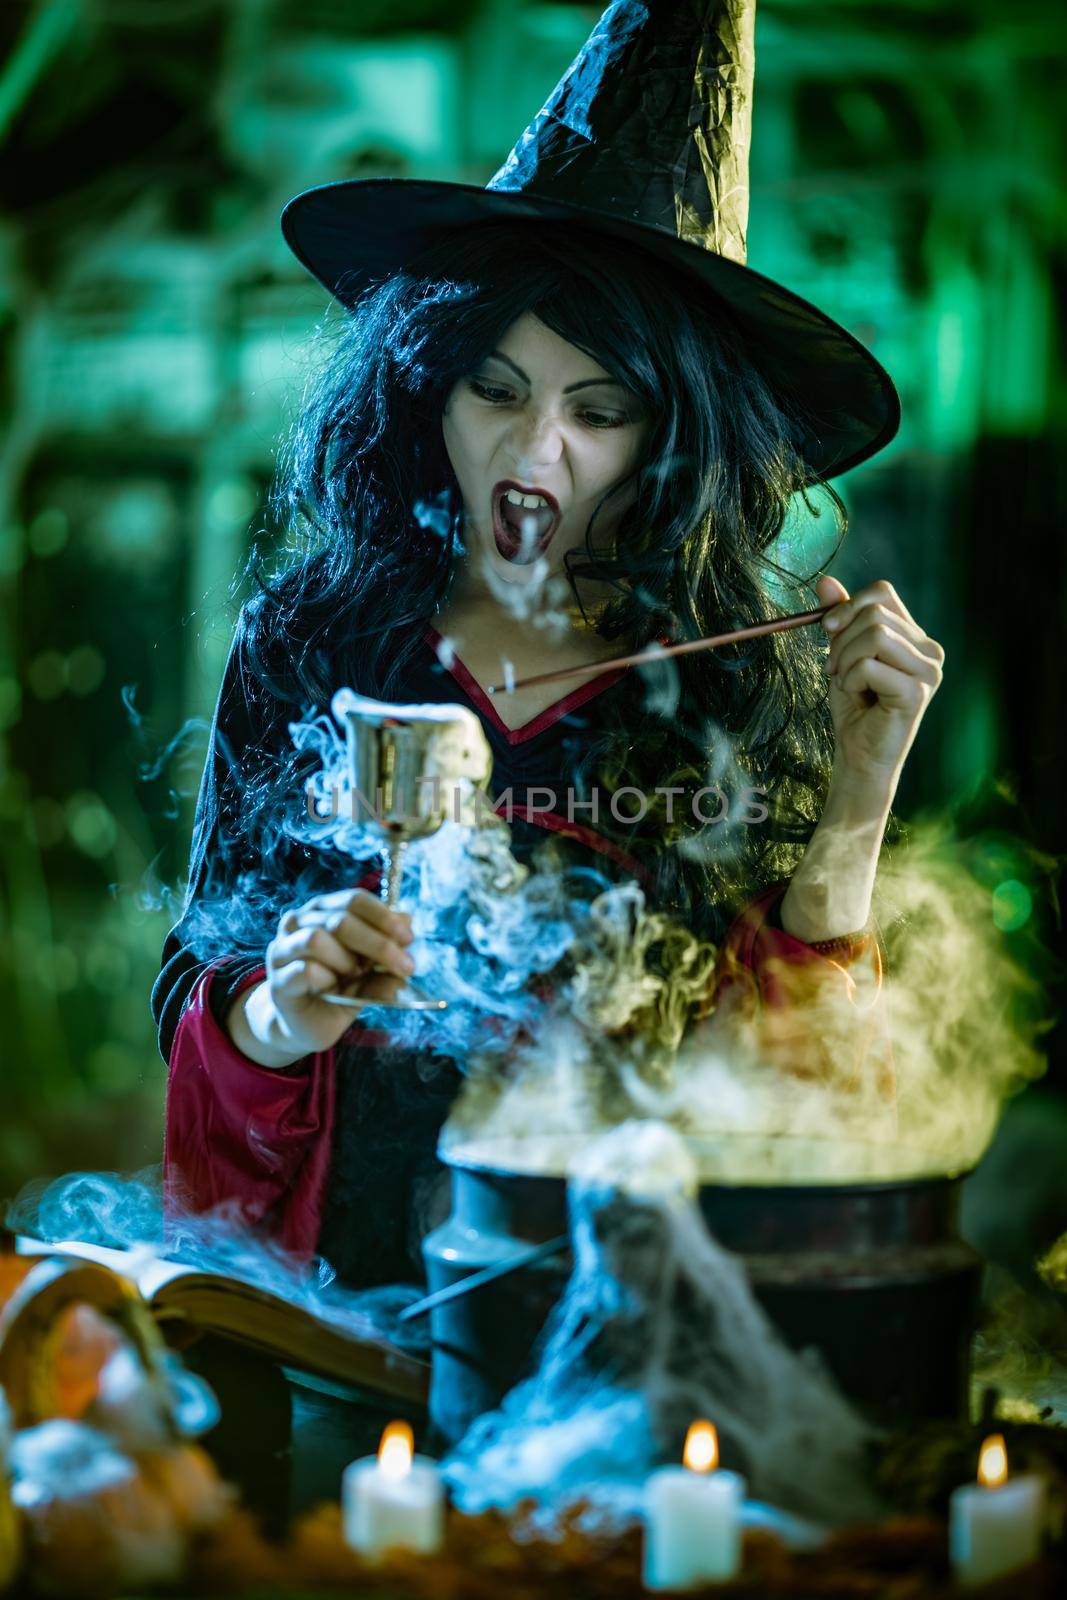 Young witch with seriously face in creepy surroundings and smoky green background holds a goblet with magic potion. 